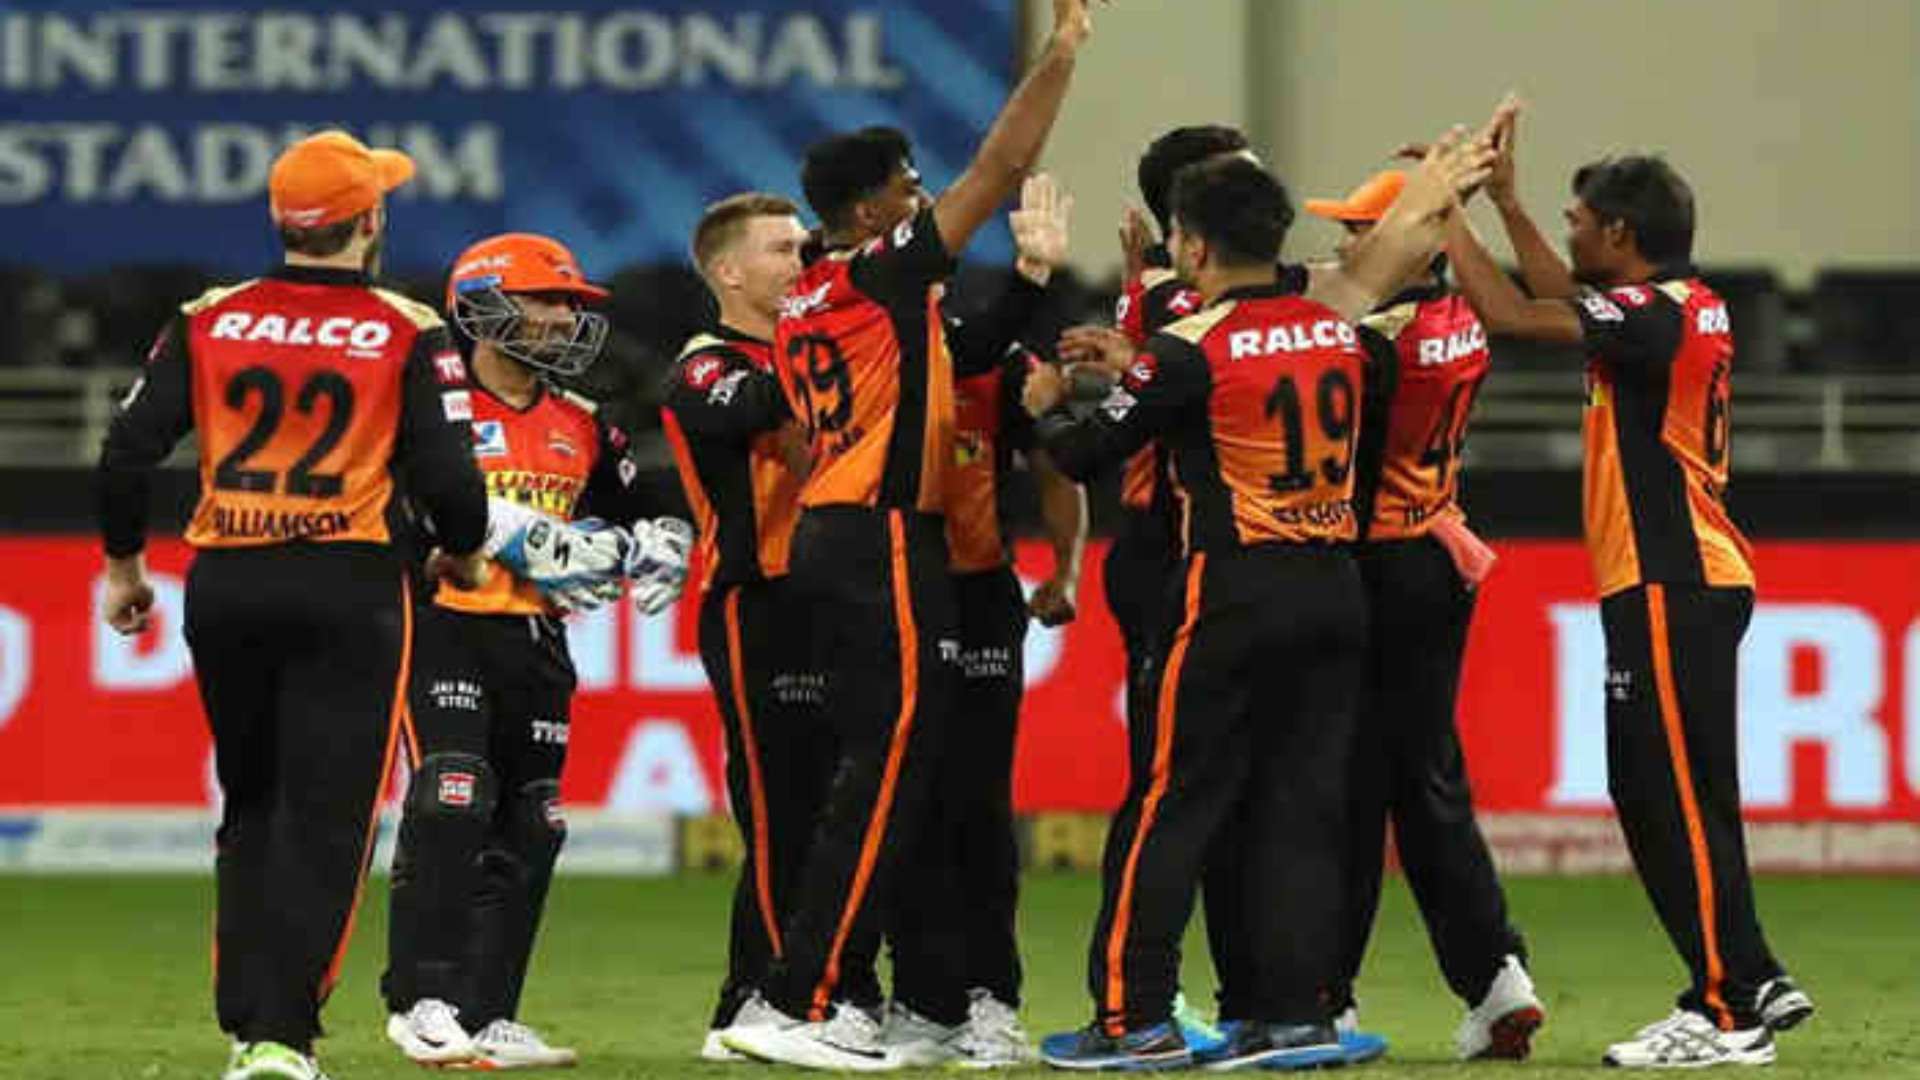 SRH players in a file photo. (Image credit: Twitter)